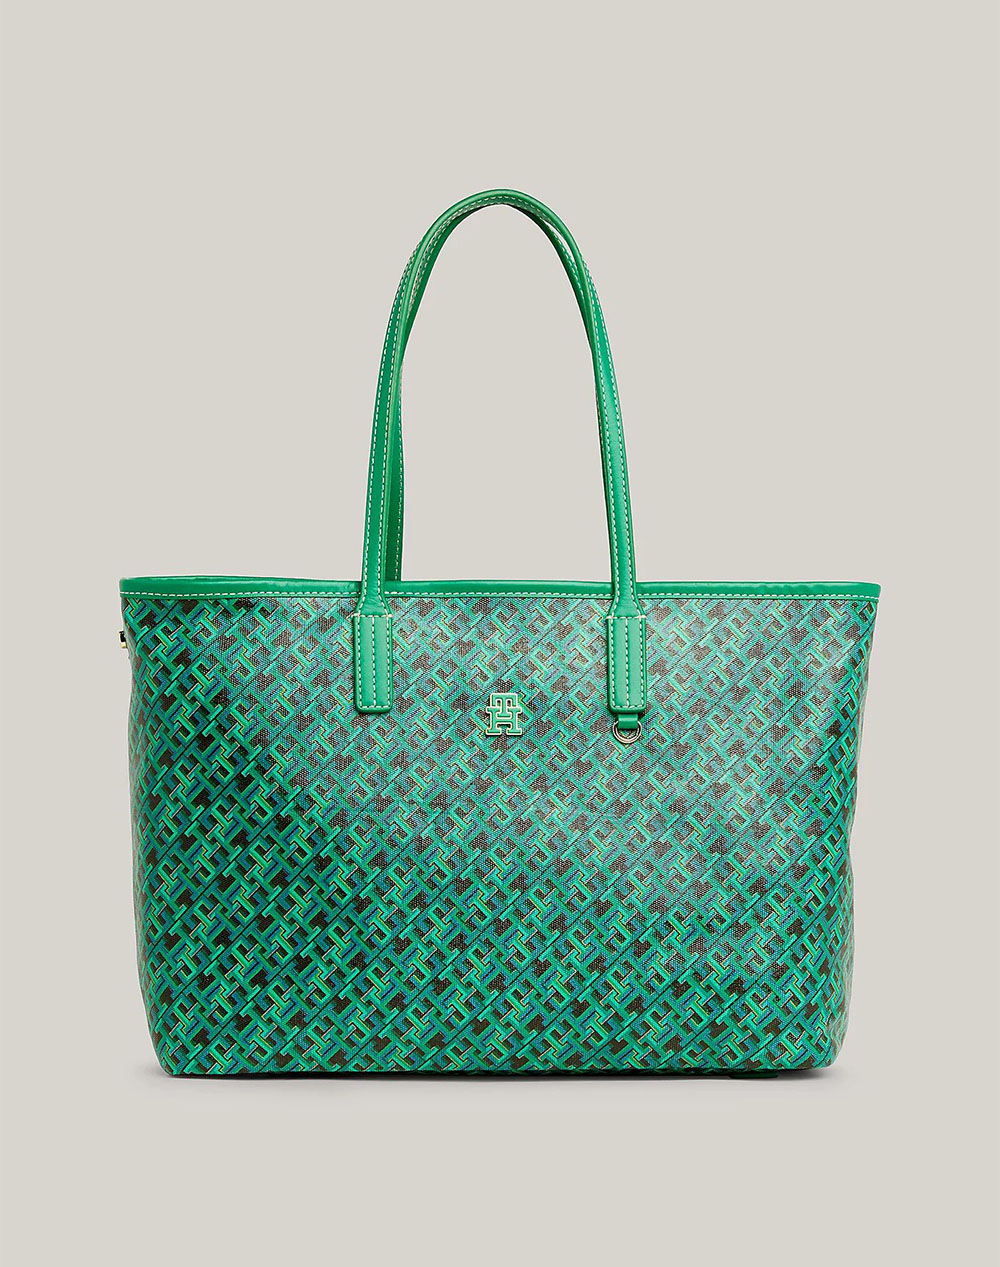 TOMMY HILFIGER TH MONOPLAY LEATHER TOTE MONO (Διαστάσεις: 51 x 15.5 x 28 εκ) AW0AW15971-L4B Green 3810ATOMM6200240_XR28177